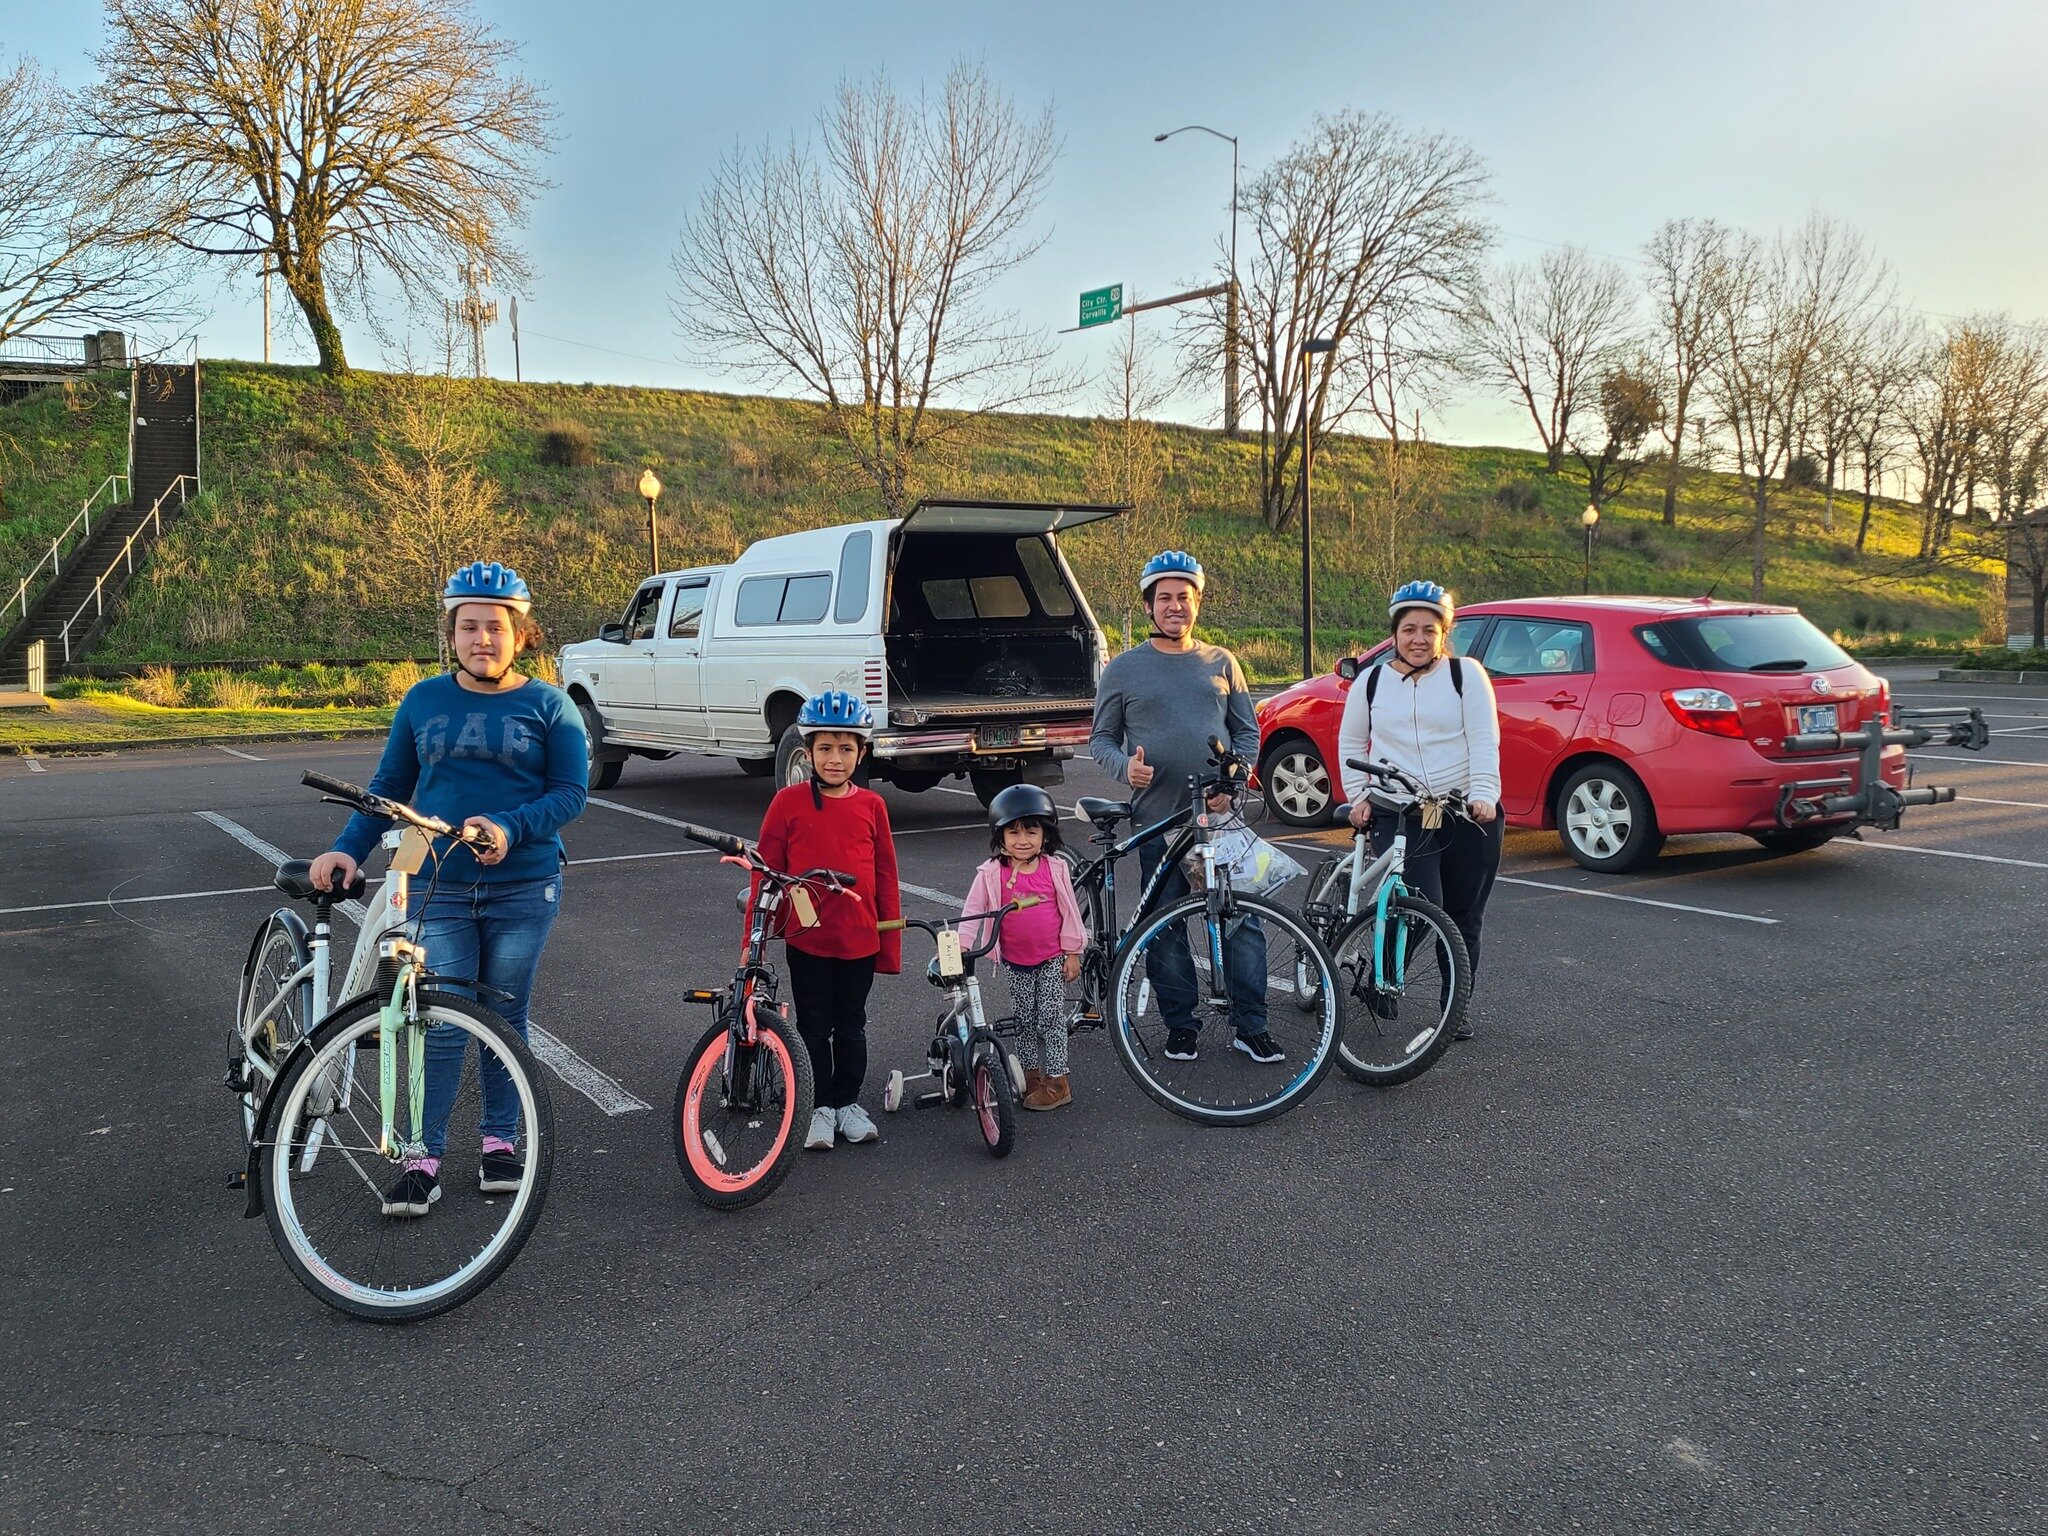 Through a special partnership with Corvallis for Refugees, the Love INC Bike Ministry provided much-needed bicycles for a family recently resettled in Corvallis. 💙